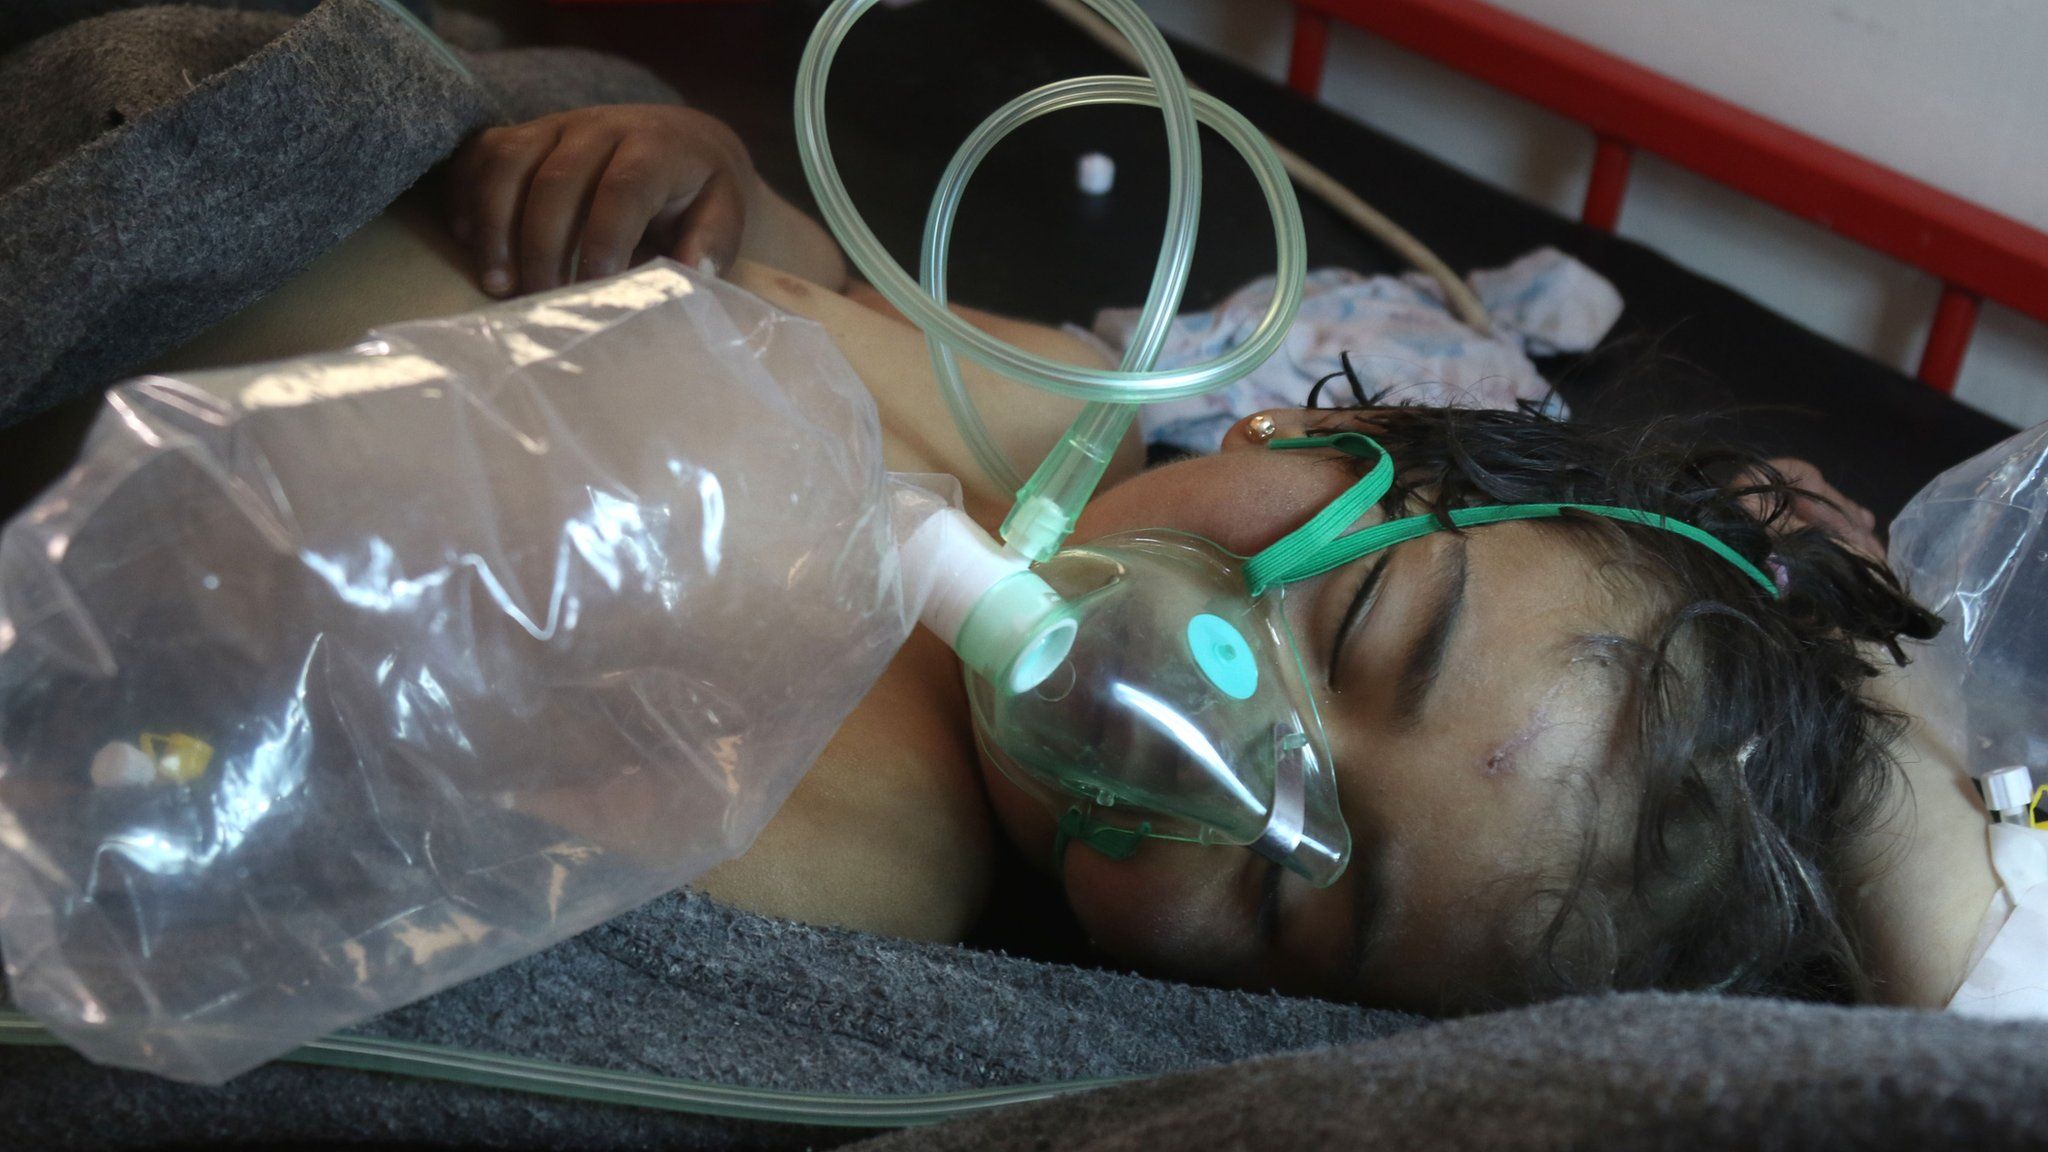 File photo taken on 4 April 2017 shows a Syrian child receiving treatment at a hospital in the town of Maarat al-Numan following a suspected Sarin attack in Khan Sheikhoun